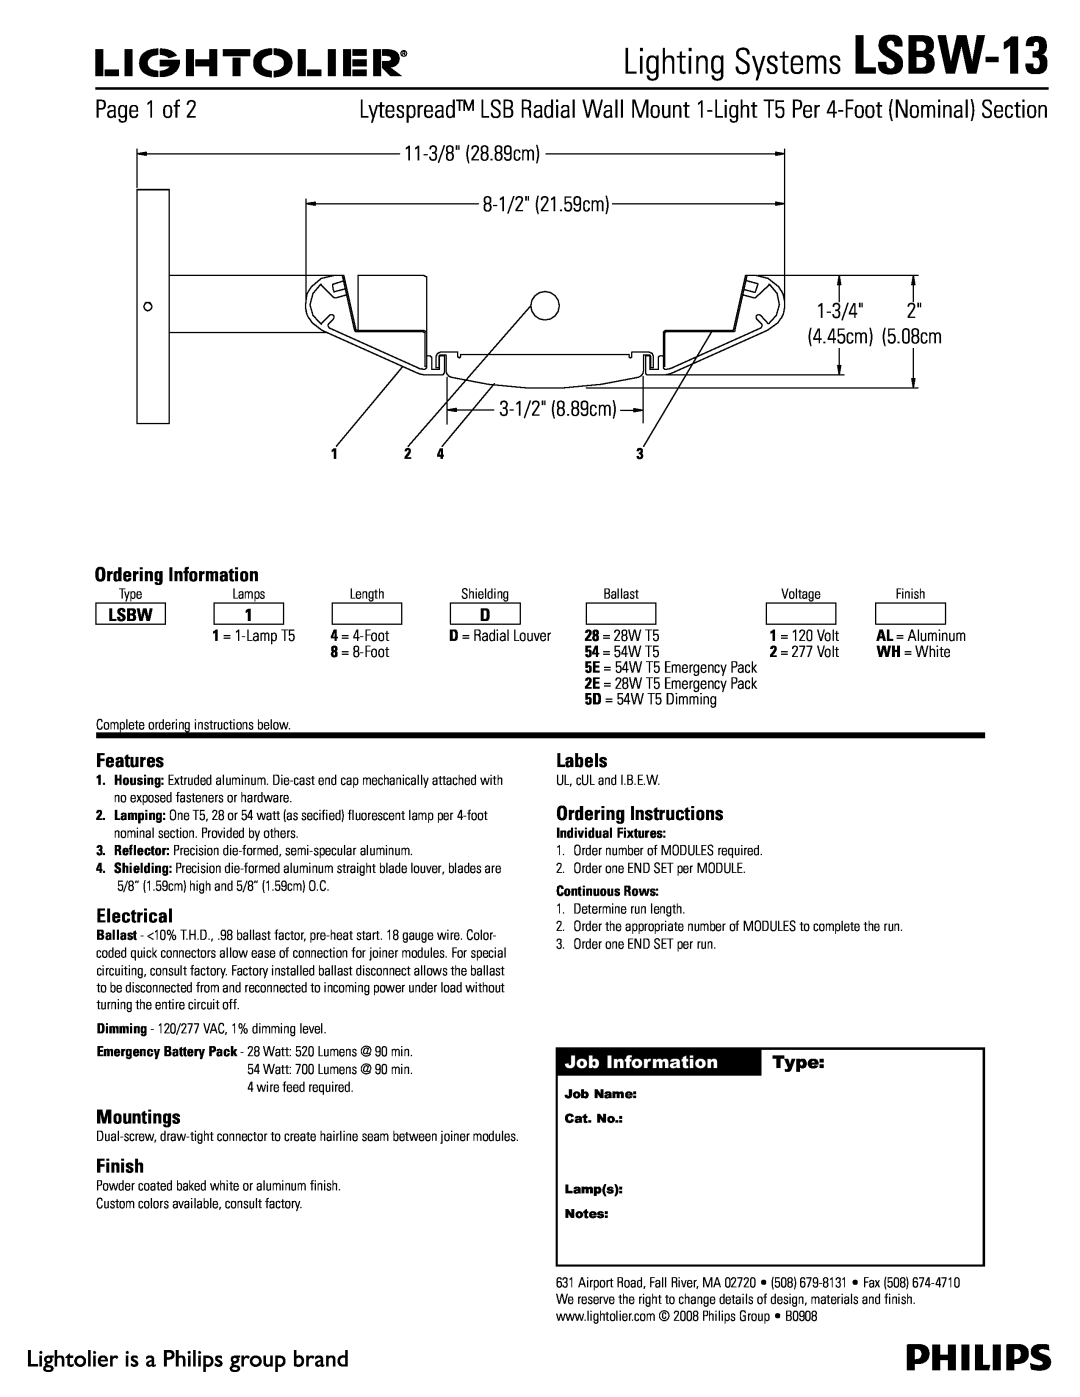 Lightolier LSBW-13 manual Ordering Information, Features, Electrical, Mountings, Finish, Labels, Ordering Instructions 